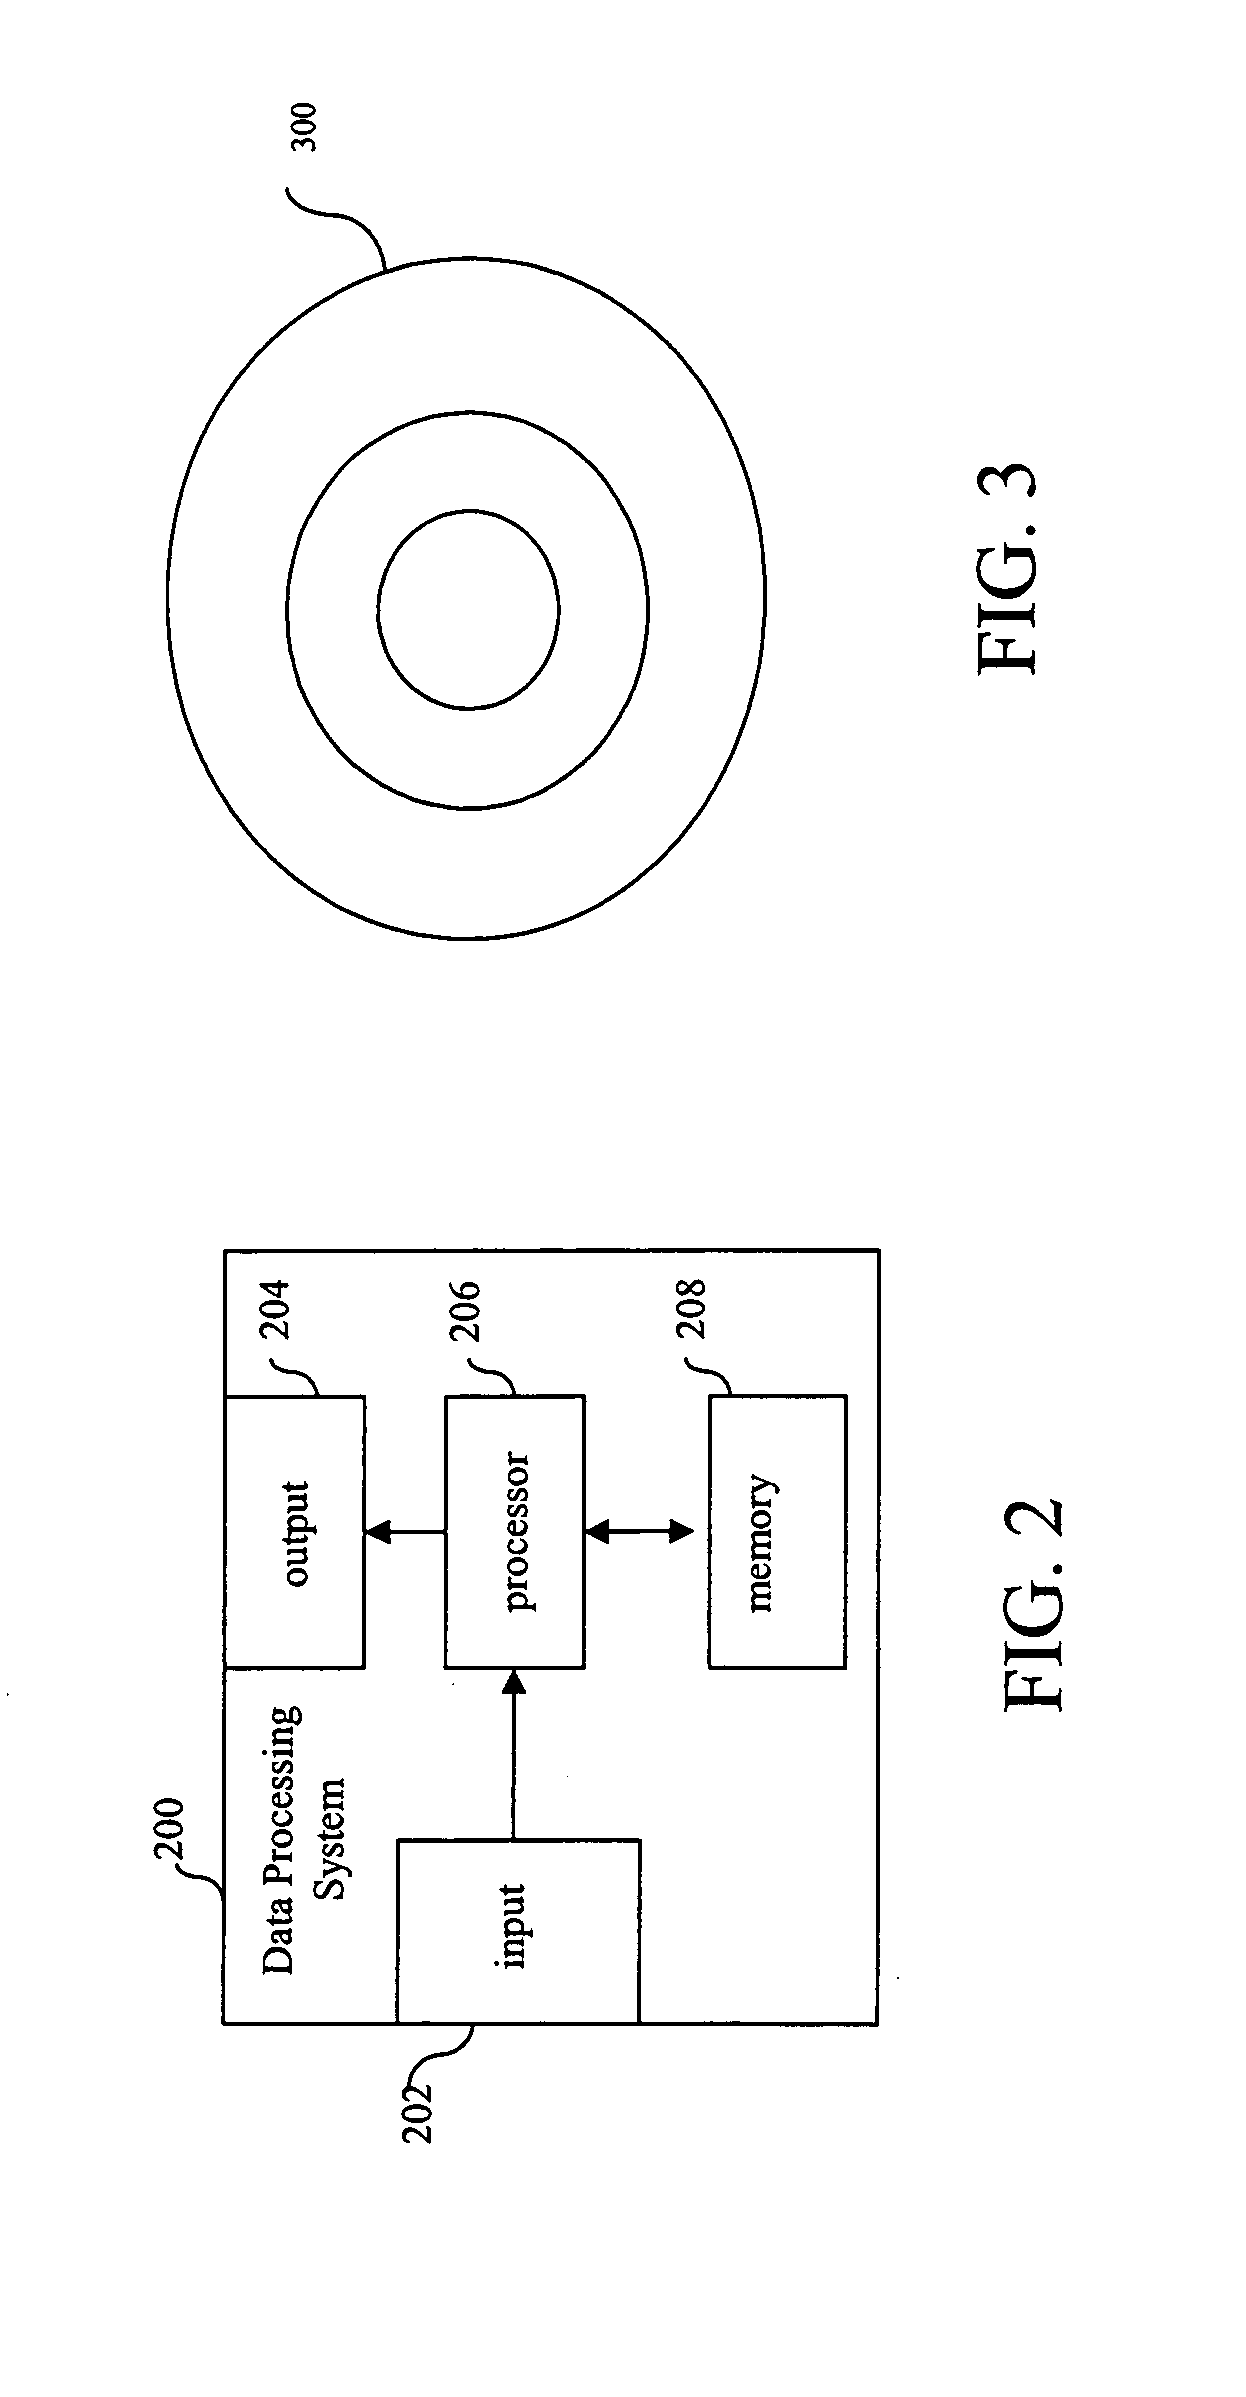 Method for automatic color balancing in digital images